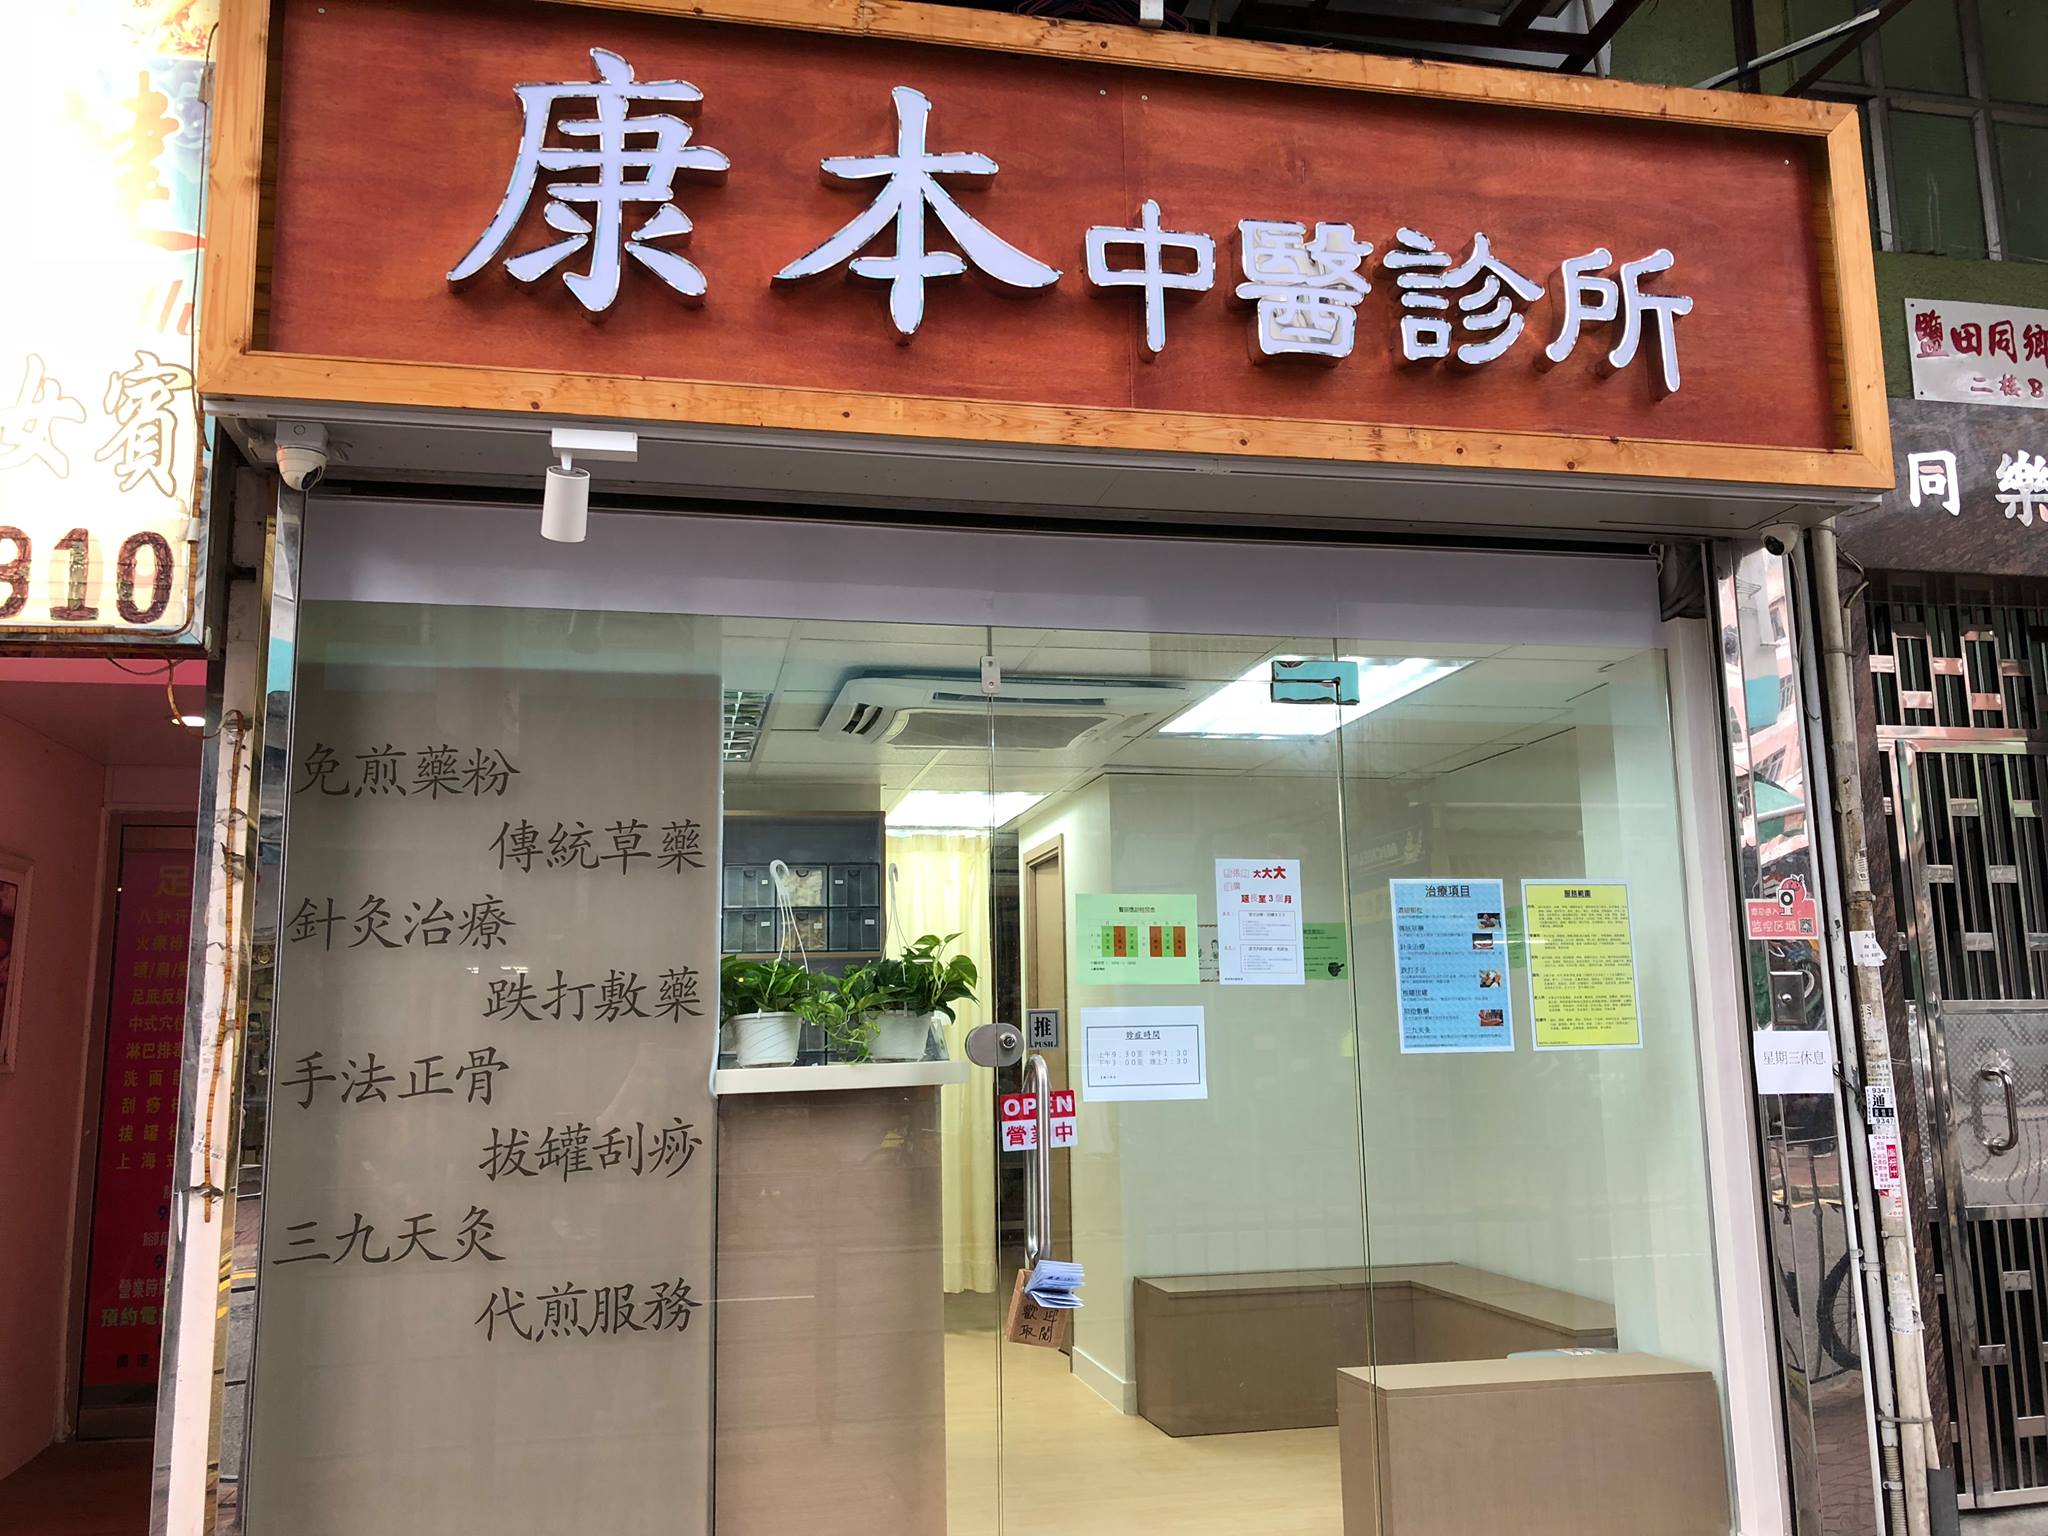 Chinese Medicine Practitioner: 李潤威